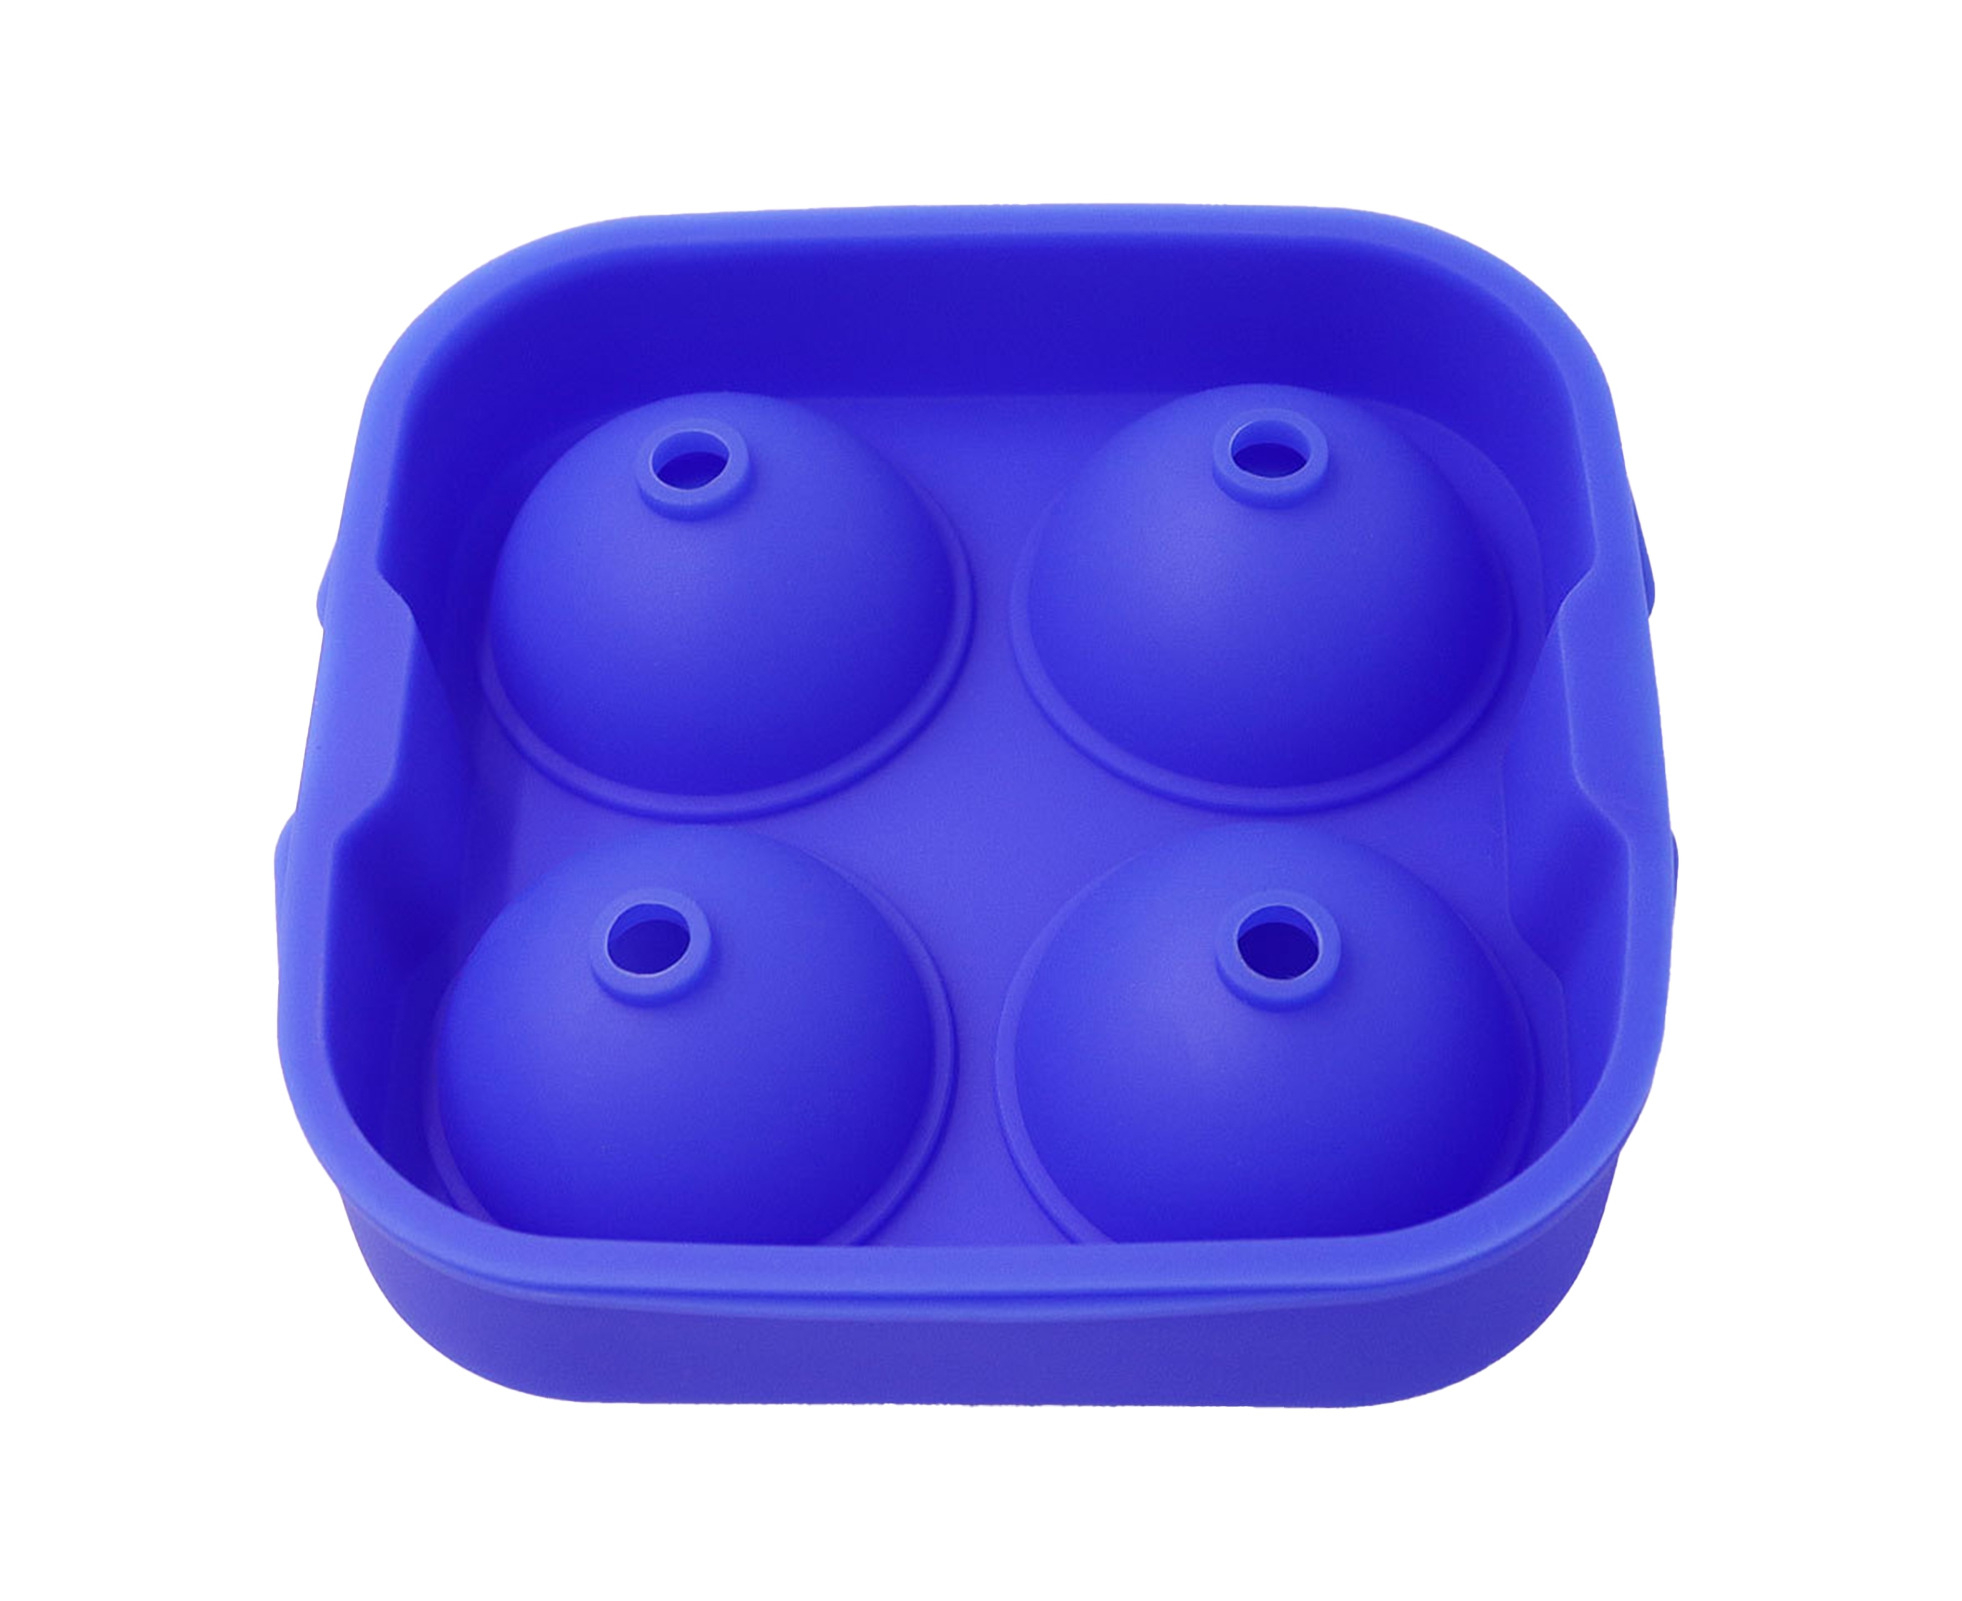 IUYJVR Seau à Glace en Silicone avec Couvercle Ice Cube Master Portable réutilisable Rond Ice Cube Maker Ice Cube Bucket pour Party Bar Club Home Garden Outdoor Camping 